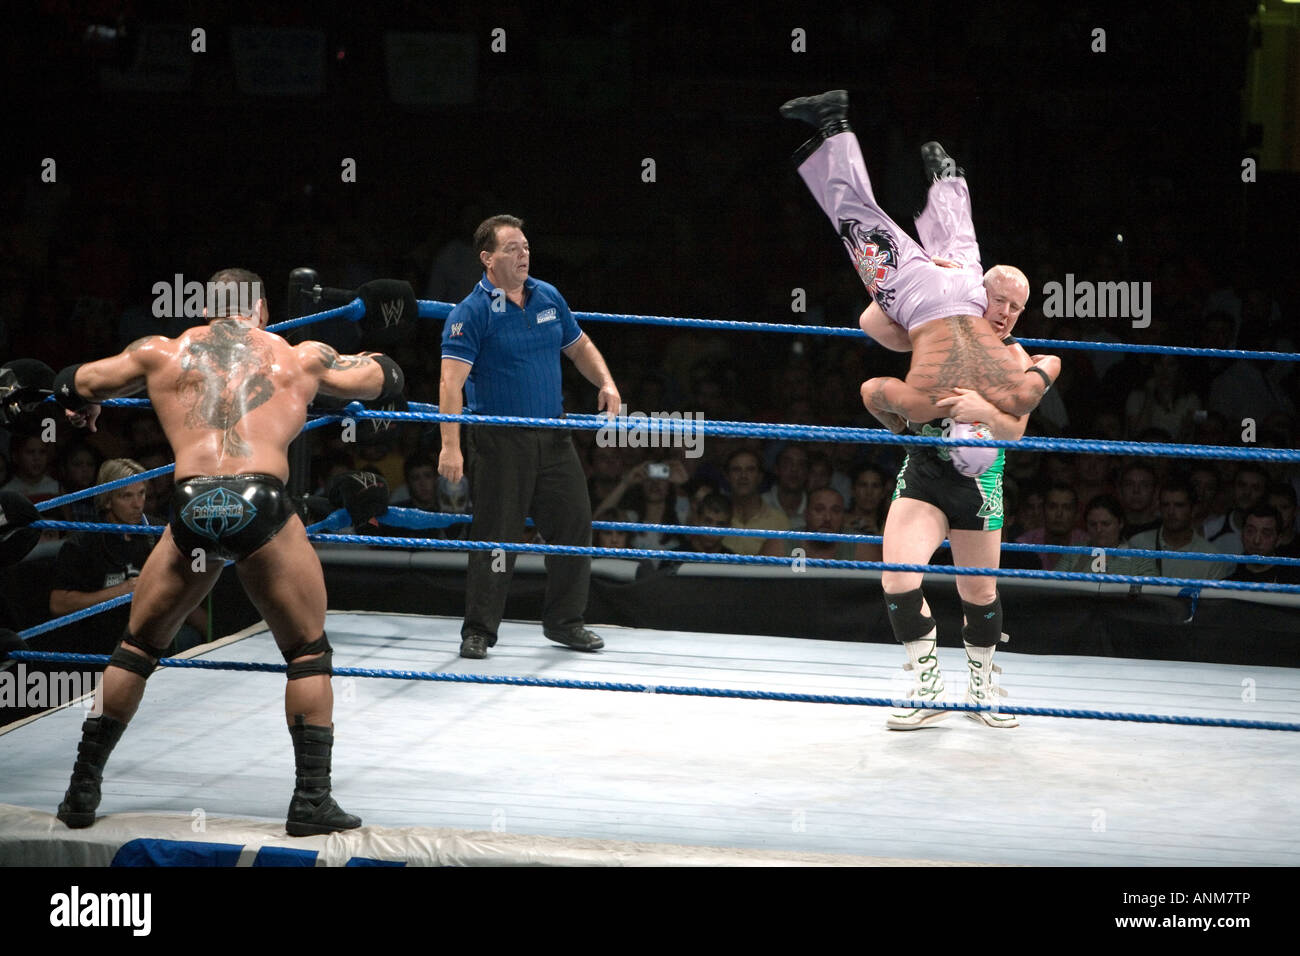 Finlay takes Rey Mysterio down during a fight at a WWE Smackdown event in Madrid, Spain. Stock Photo